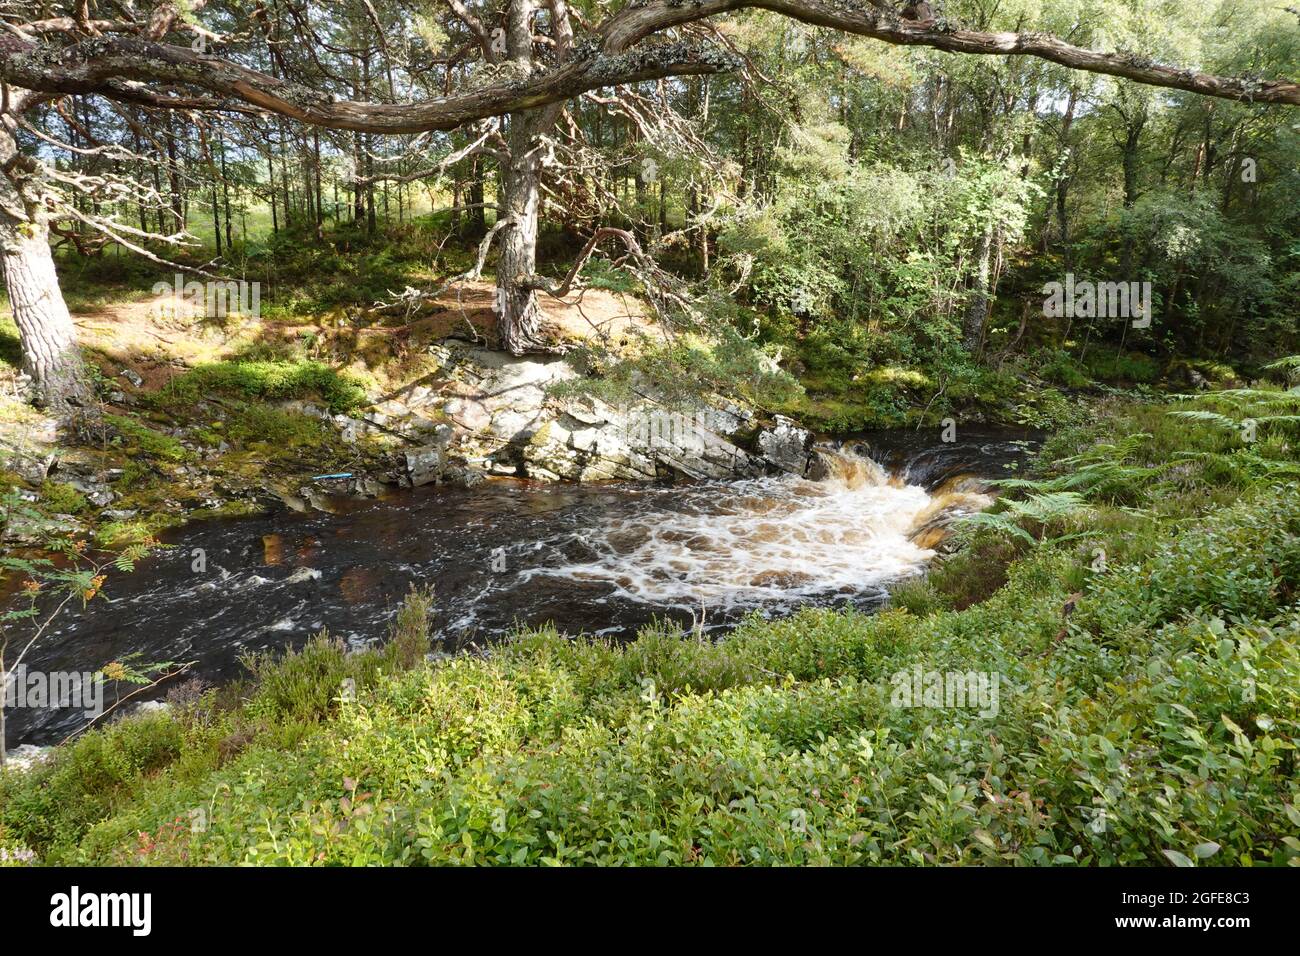 Black Wood of Rannoch the remains of an ancient Caledonian Forest that once covered much of the Scottish Highlands, United Kingdom Stock Photo